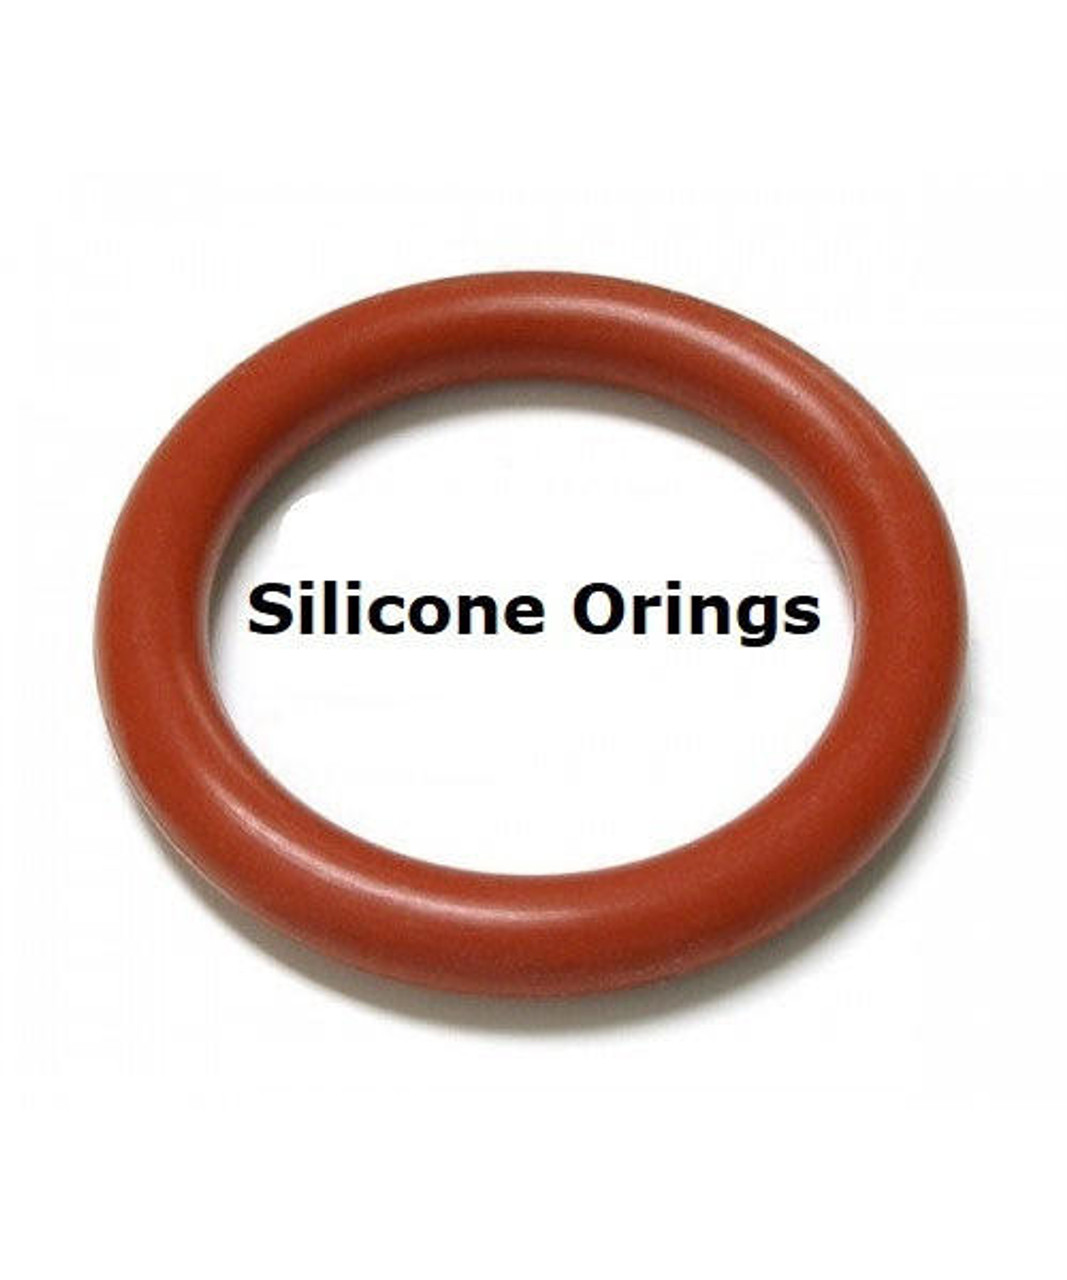 Silicone O-rings Size 394 Price for 1 pc